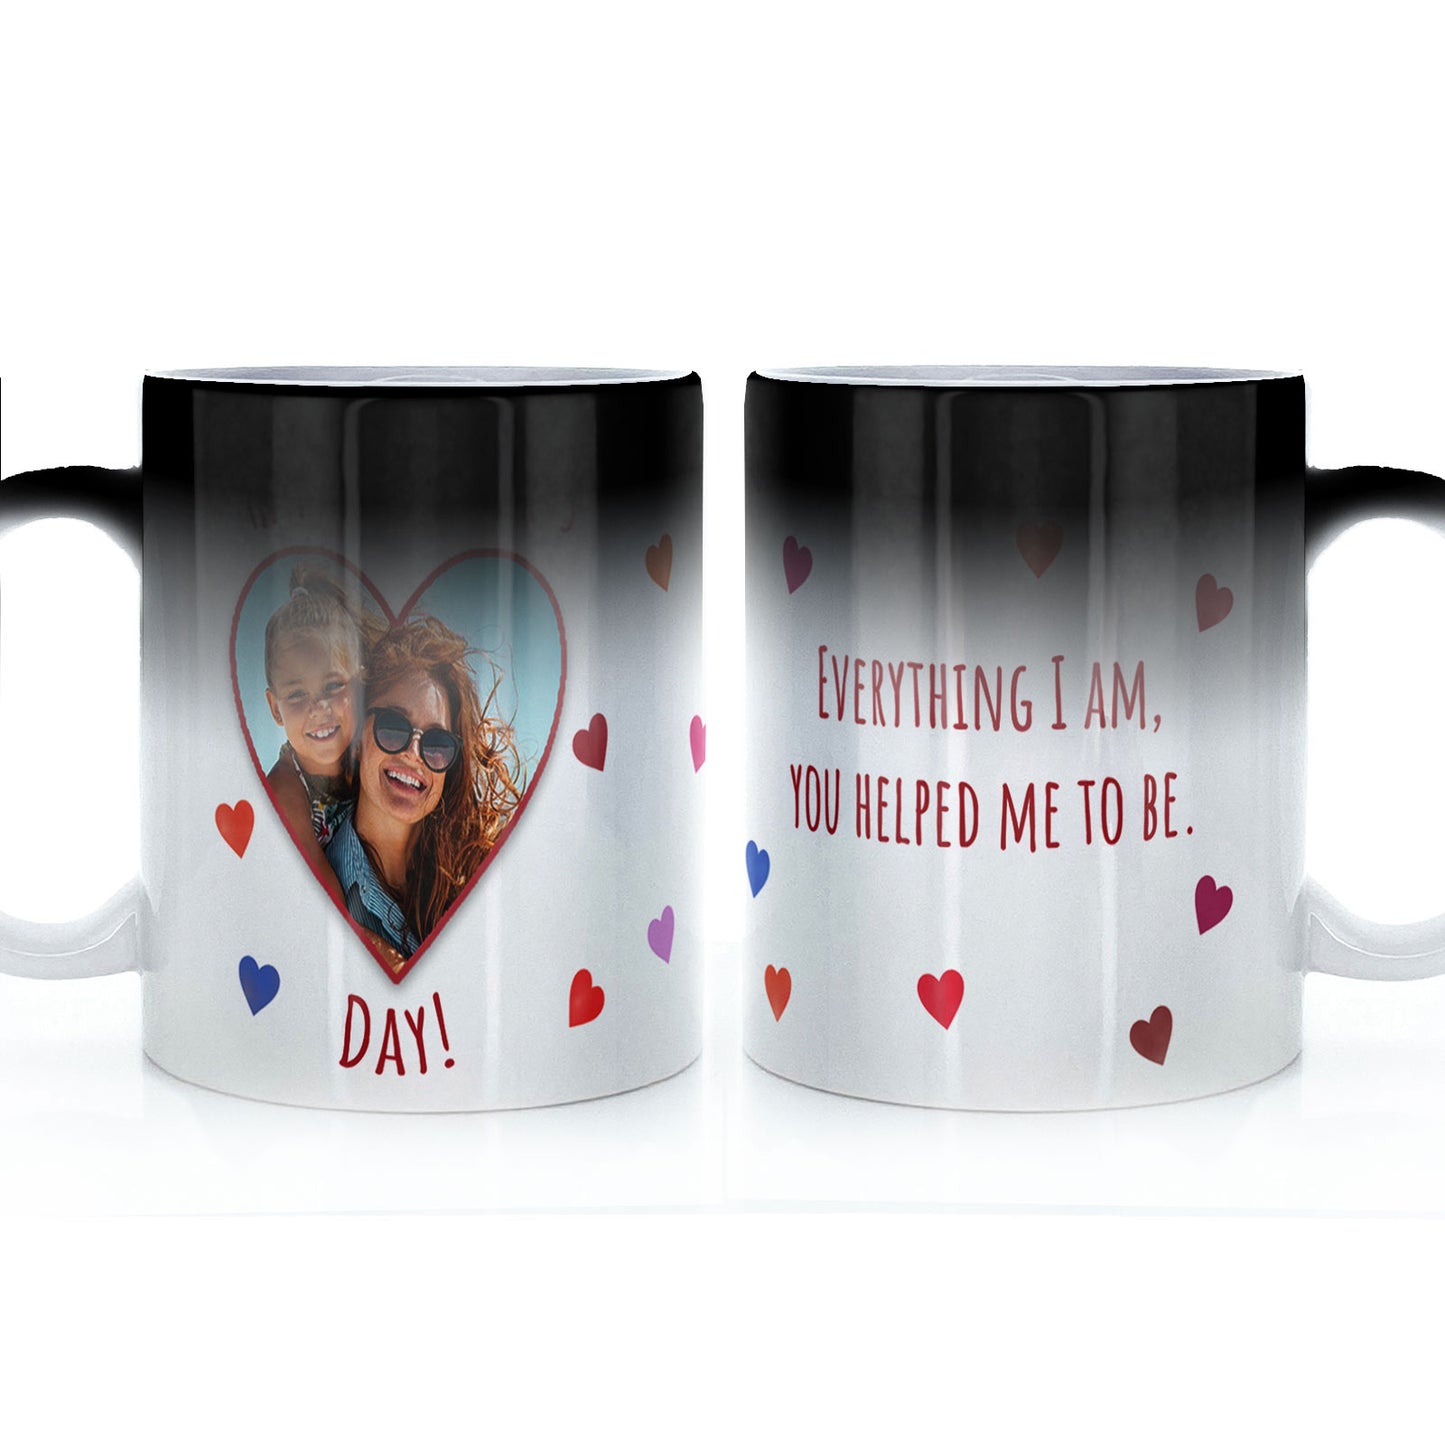 Personalised Mug with Mother’s Day Heart Photo